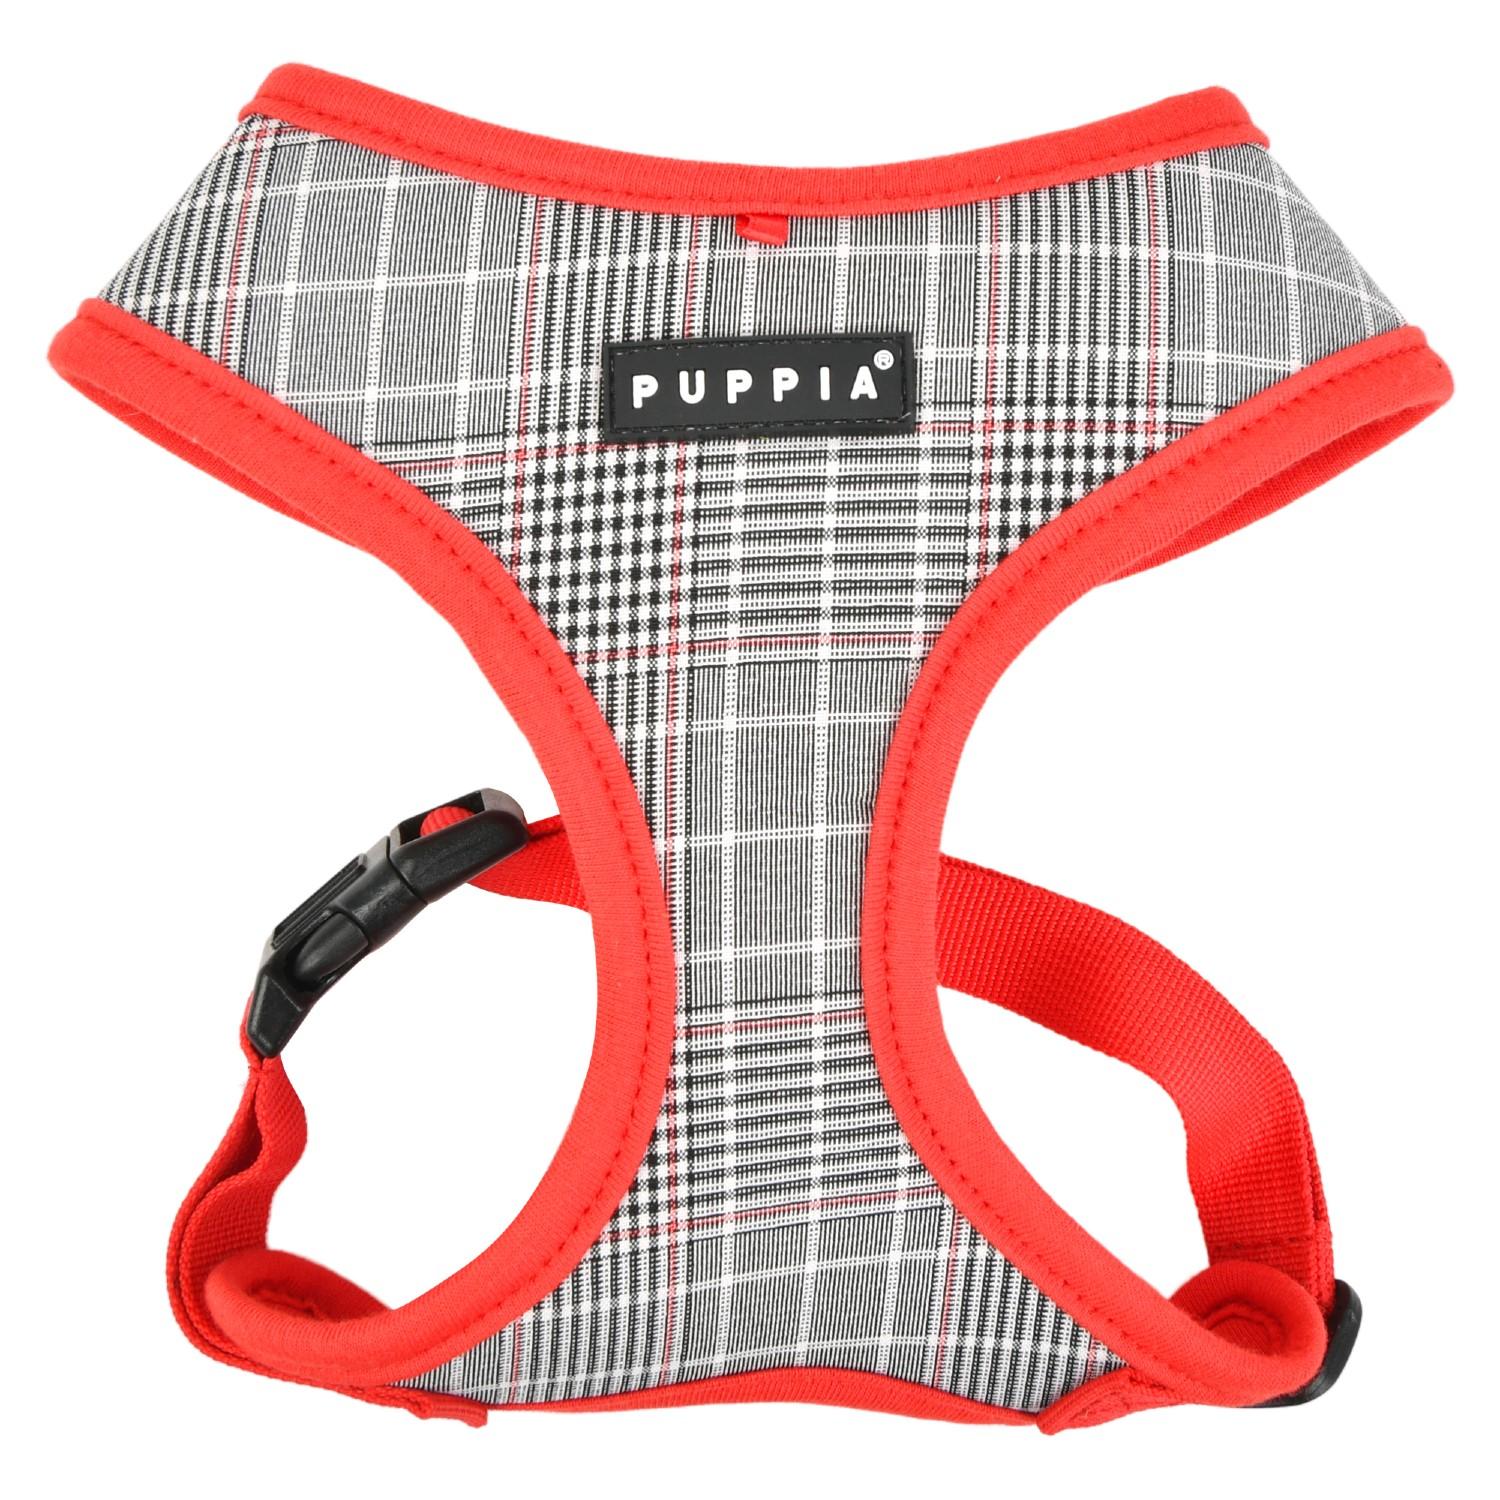 Blake Adjustable Dog Harness by Puppia - Red